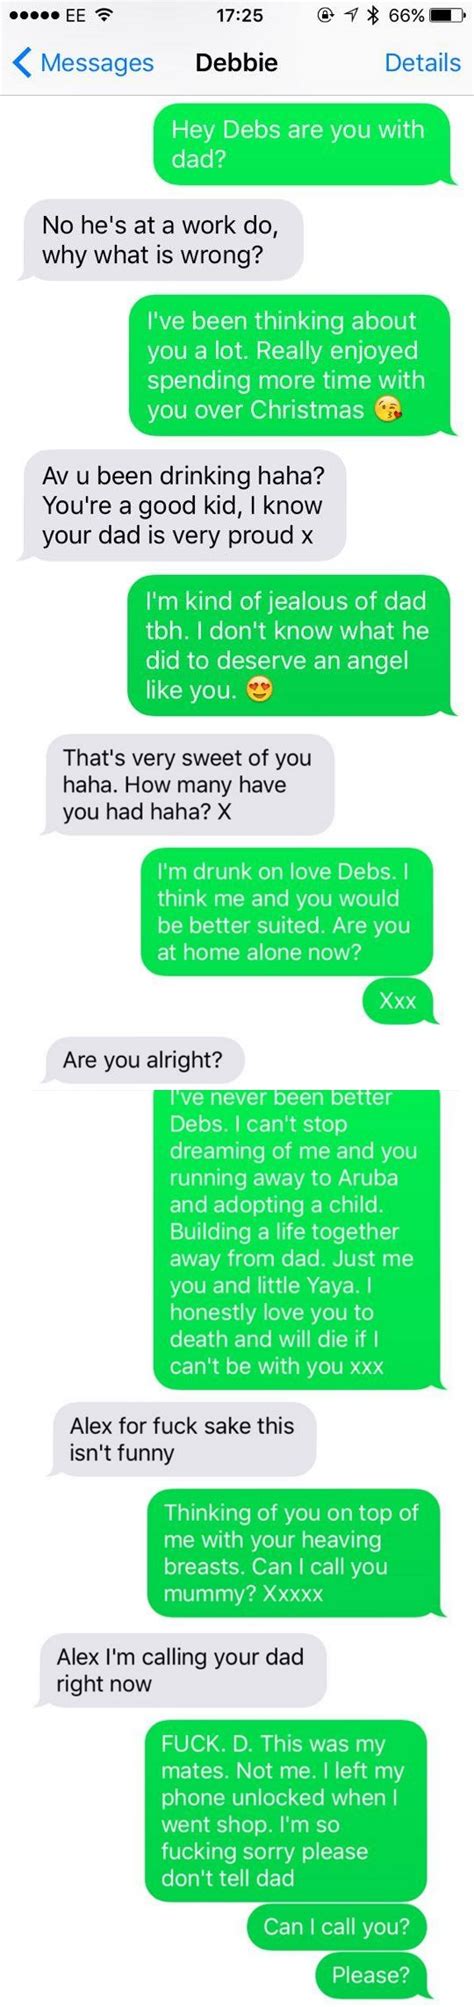 Lads Mates Prank Text His Stepmum And It All Gets Way Out Of Hand